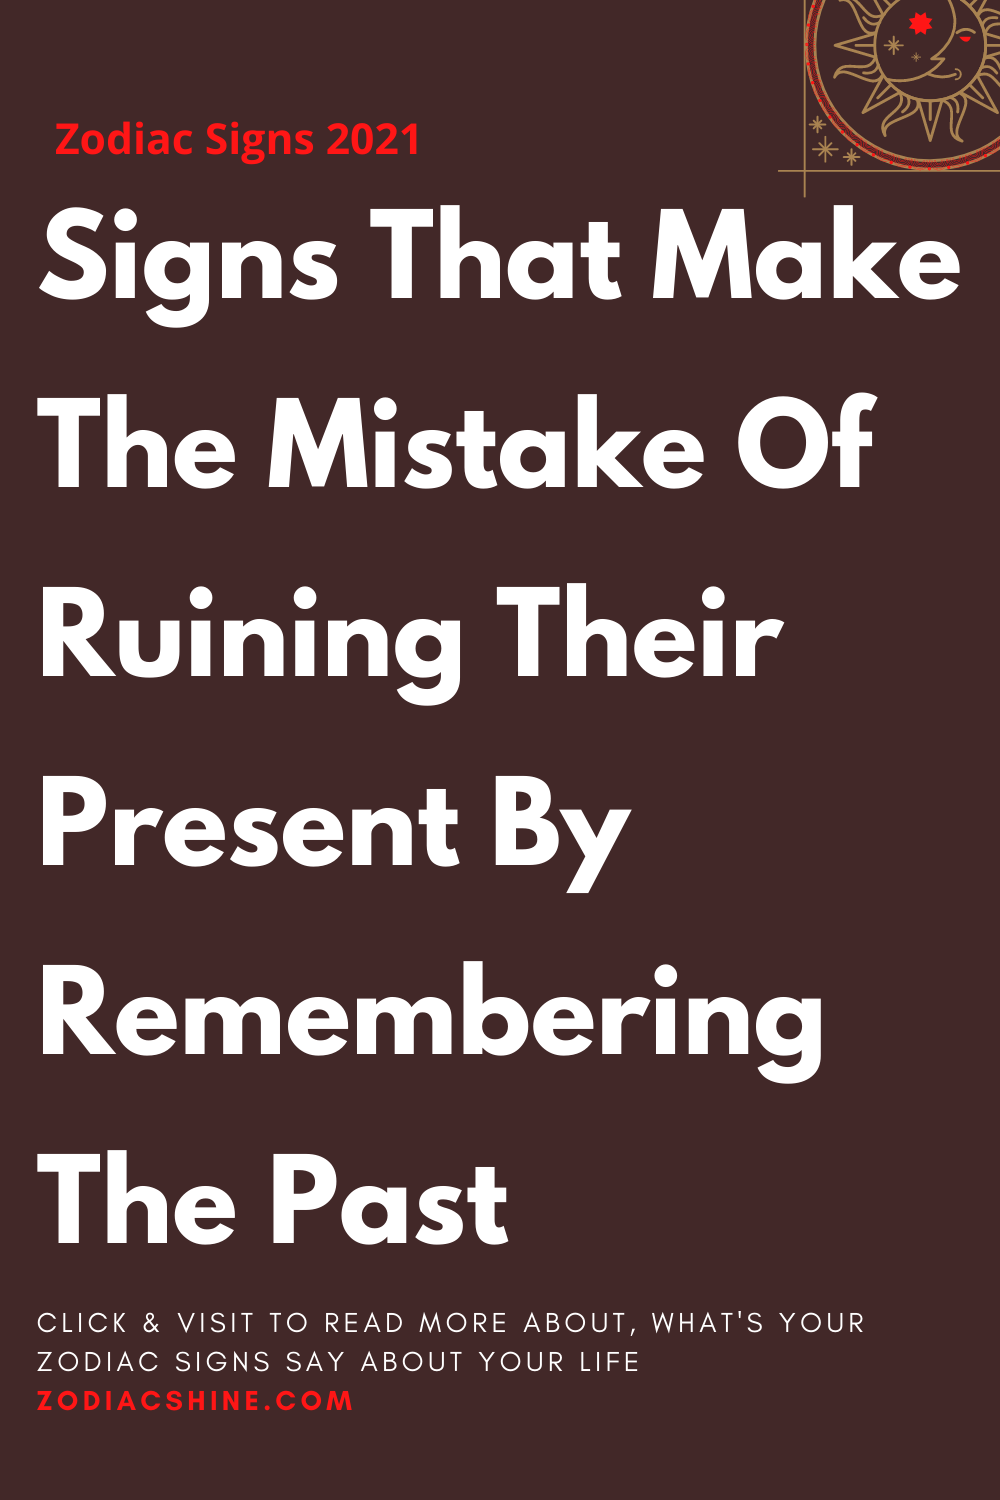 Signs That Make The Mistake Of Ruining Their Present By Remembering The Past